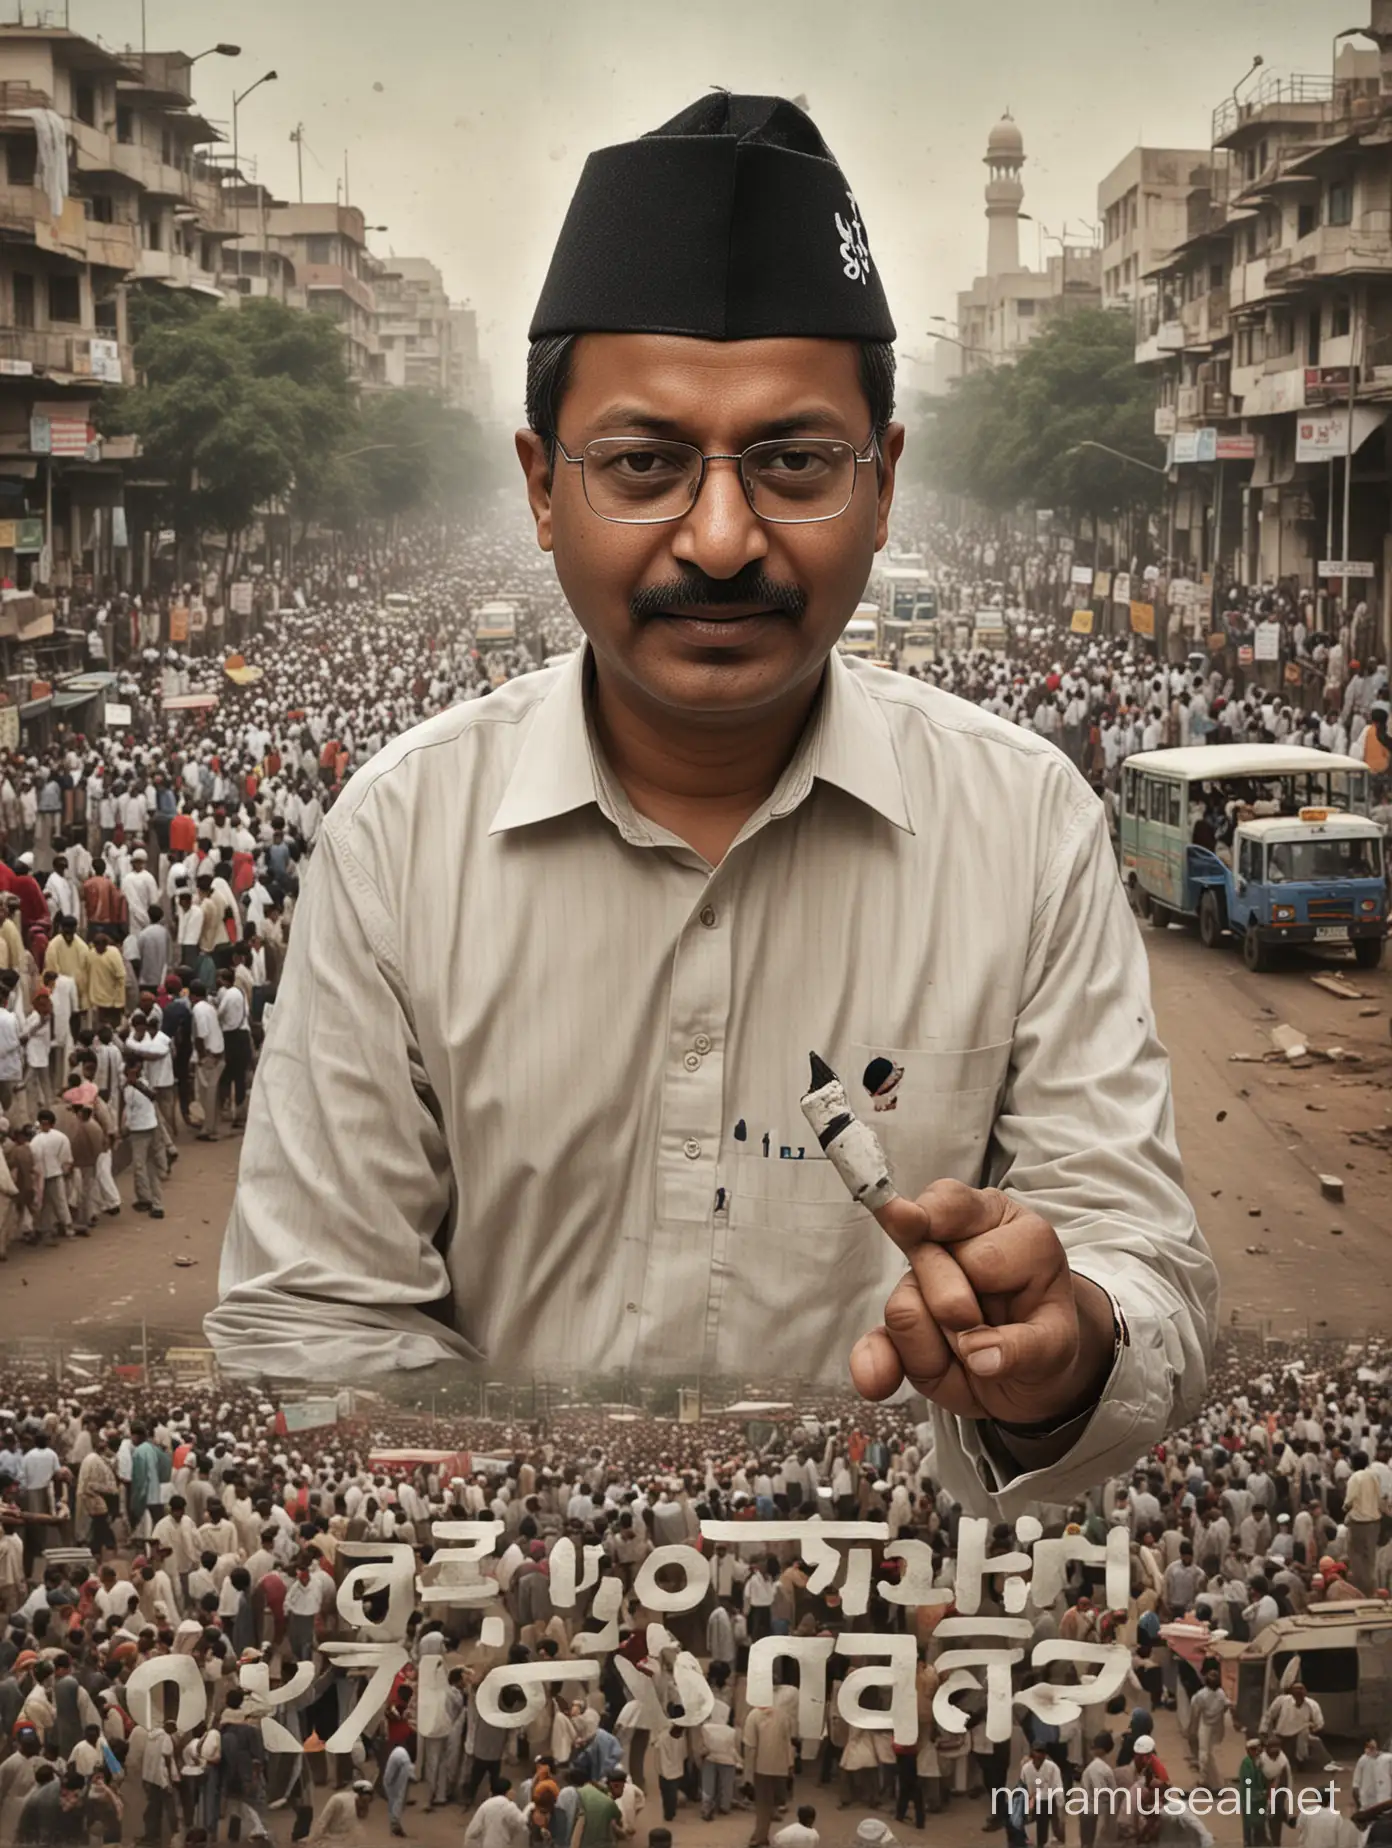 Concept: A satirical movie poster highlighting the controversies and allegations surrounding Arvind Kejriwal and the Aam Aadmi Party (AAP) in Delhi. Central Figure: Arvind Kejriwal, Chief Minister of Delhi, with a cunning or smug expression. His hands could be forming a heart shape around his eyes, similar to the original prompt, symbolizing a love for power and control. His eyes could be narrowed, suggesting a calculating or manipulative nature. His skin can have a muted or grayish hue, implying a lack of transparency or hidden agendas. Background: A collage of Delhi-specific elements, such as images of government schools, mohalla clinics, water tankers, electricity bills, and perhaps even onions (referencing past controversies). The Delhi Legislative Assembly building could be faintly visible in the background, representing the political landscape of Delhi. Text: Headline: "From Activist to CM: The Controversial Rise of Arvind Kejriwal" - This text should be in a bold, white font at the top of the image, providing context. Title: "DELHI DARBAR" (meaning "Court of Delhi") in large, stylized letters at the bottom, referencing the political power dynamics in Delhi. Credit: A small text mentioning the creator of the poster or a relevant source can be placed at the bottom corner. Style: The overall style should be dramatic and eye-catching, similar to a movie poster but with a clear satirical tone. The colors could be muted and contrasting, using shades of gray, black, and white with splashes of color related to the AAP party to create a sense of ambiguity and intrigue. Additional elements: You may incorporate subtle details like the AAP party symbol (broom), a muffler (Kejriwal's signature attire), or references to specific controversies or scandals associated with him or the party. Mood: The image should evoke feelings of skepticism, curiosity, and raise questions about the political landscape and governance in Delhi.